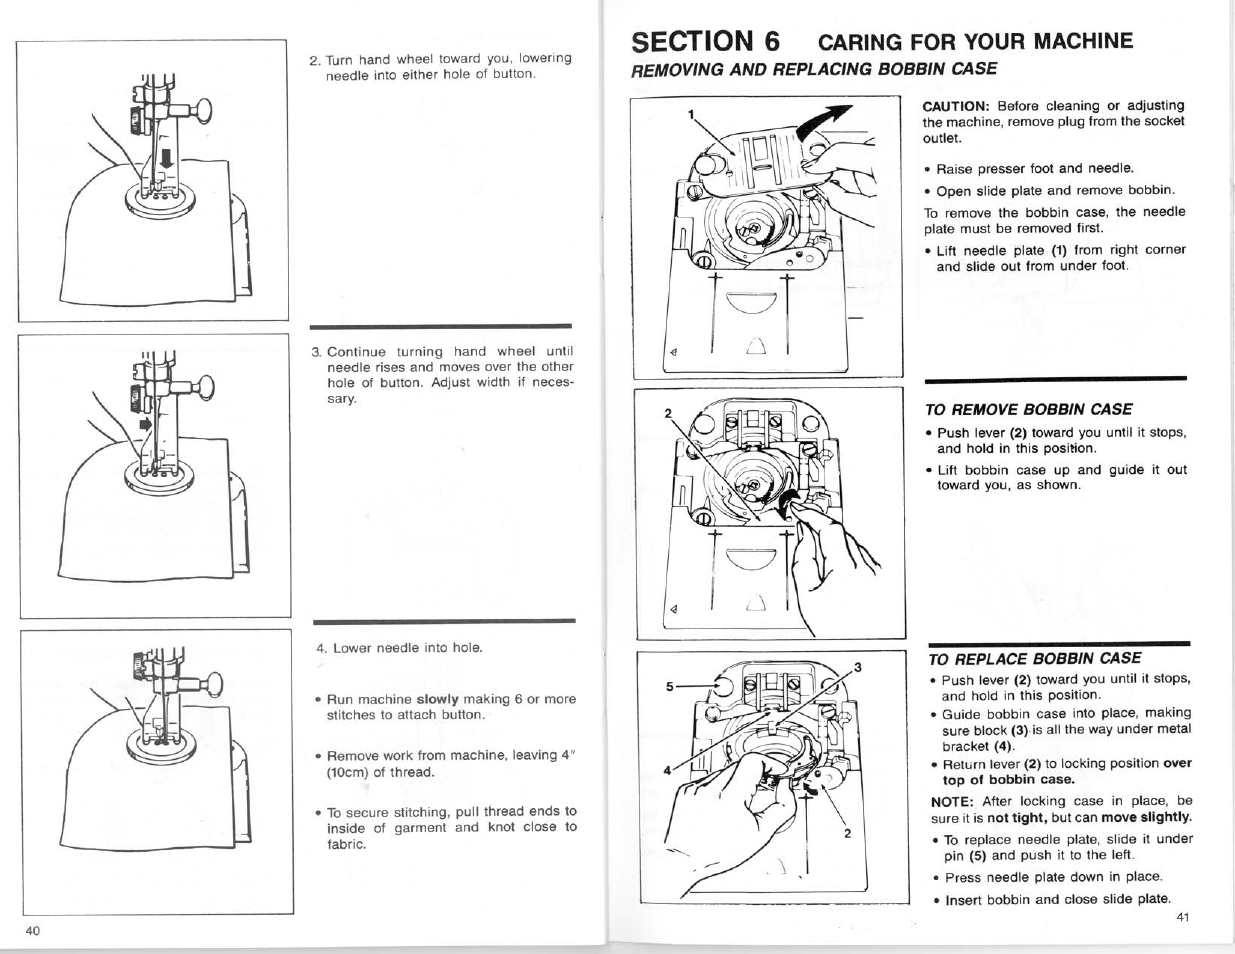 Removing and replacing bobbin case, To remove bobbin case, Caring for your machine | SINGER 9124 User Manual | Page 22 / 25